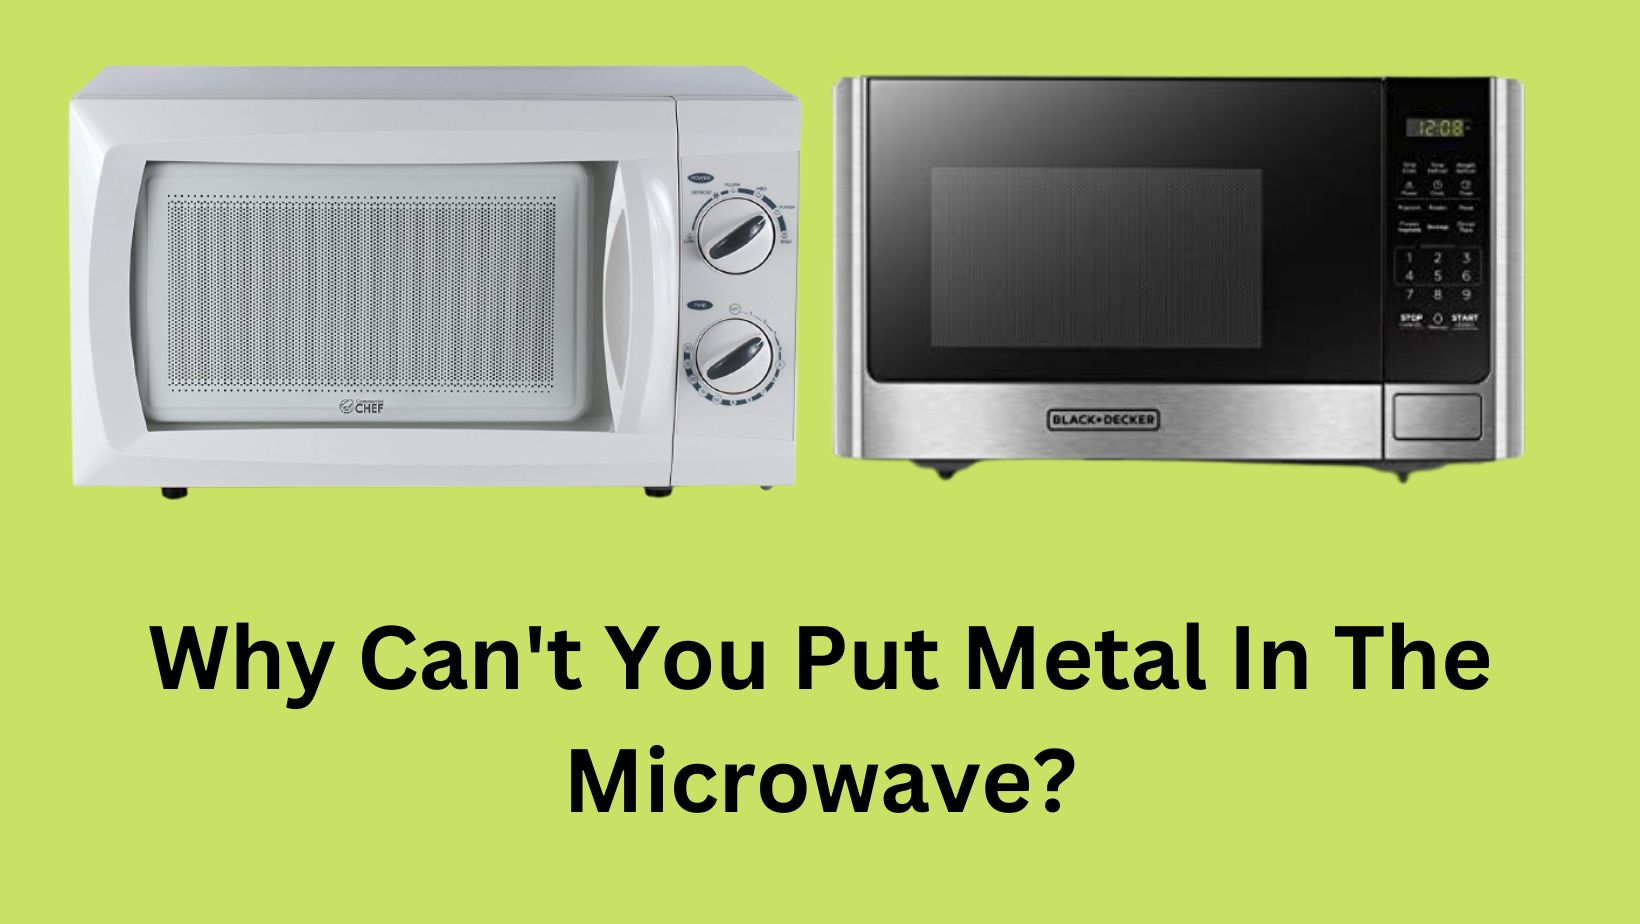 Why Can't You Put Metal In The Microwave?